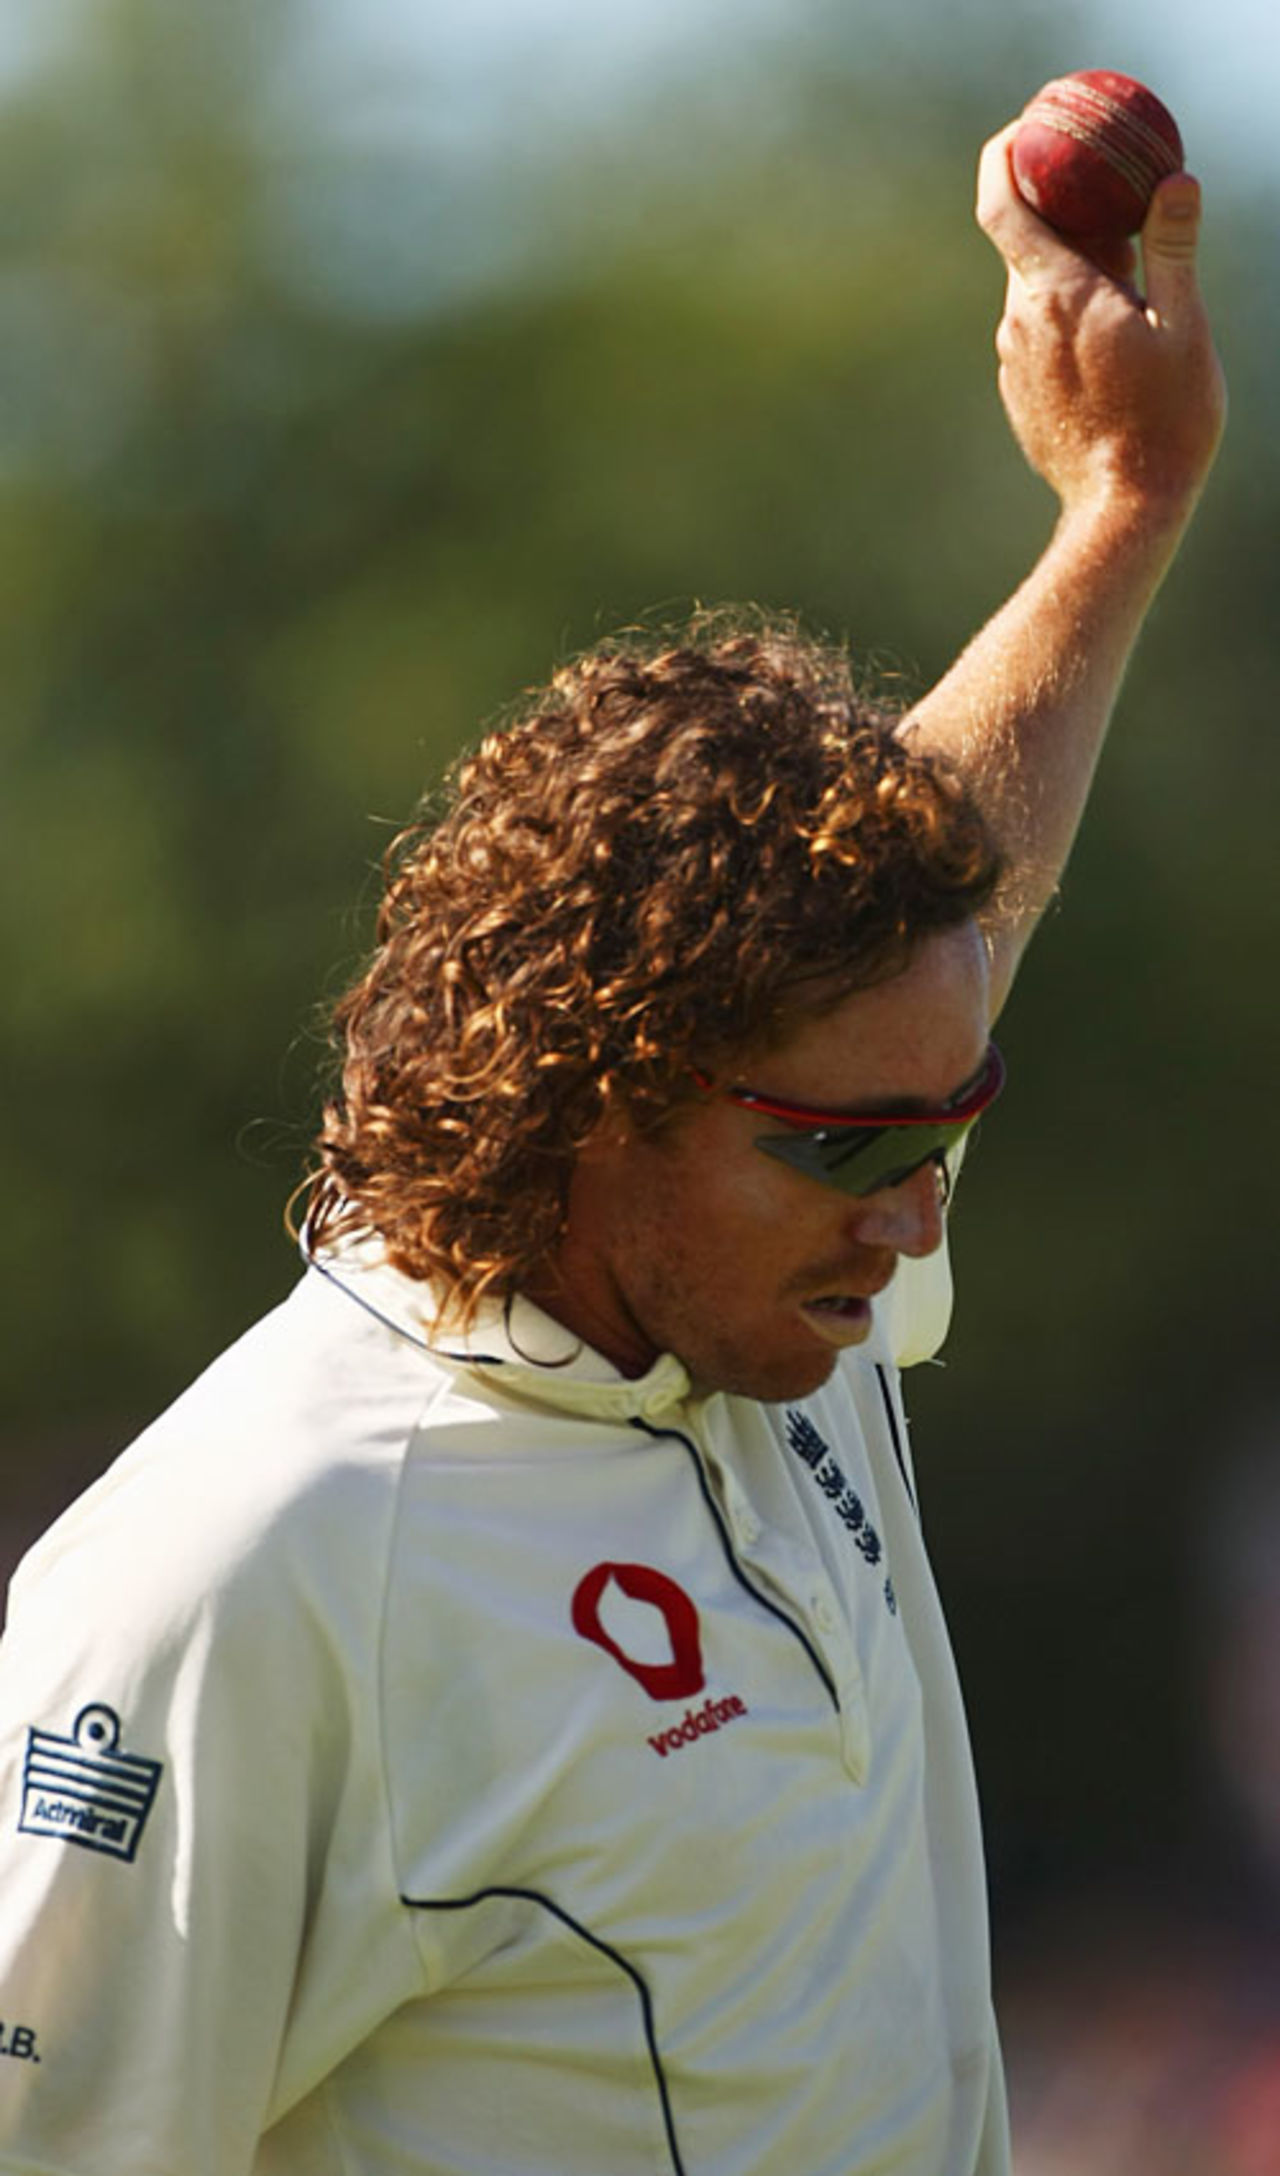 Ryan Sidebottom acknowledges the crowd as he leaves the field after finishing with 6 for 49, New Zealand v England, 1st Test, Hamilton, March 9, 2008